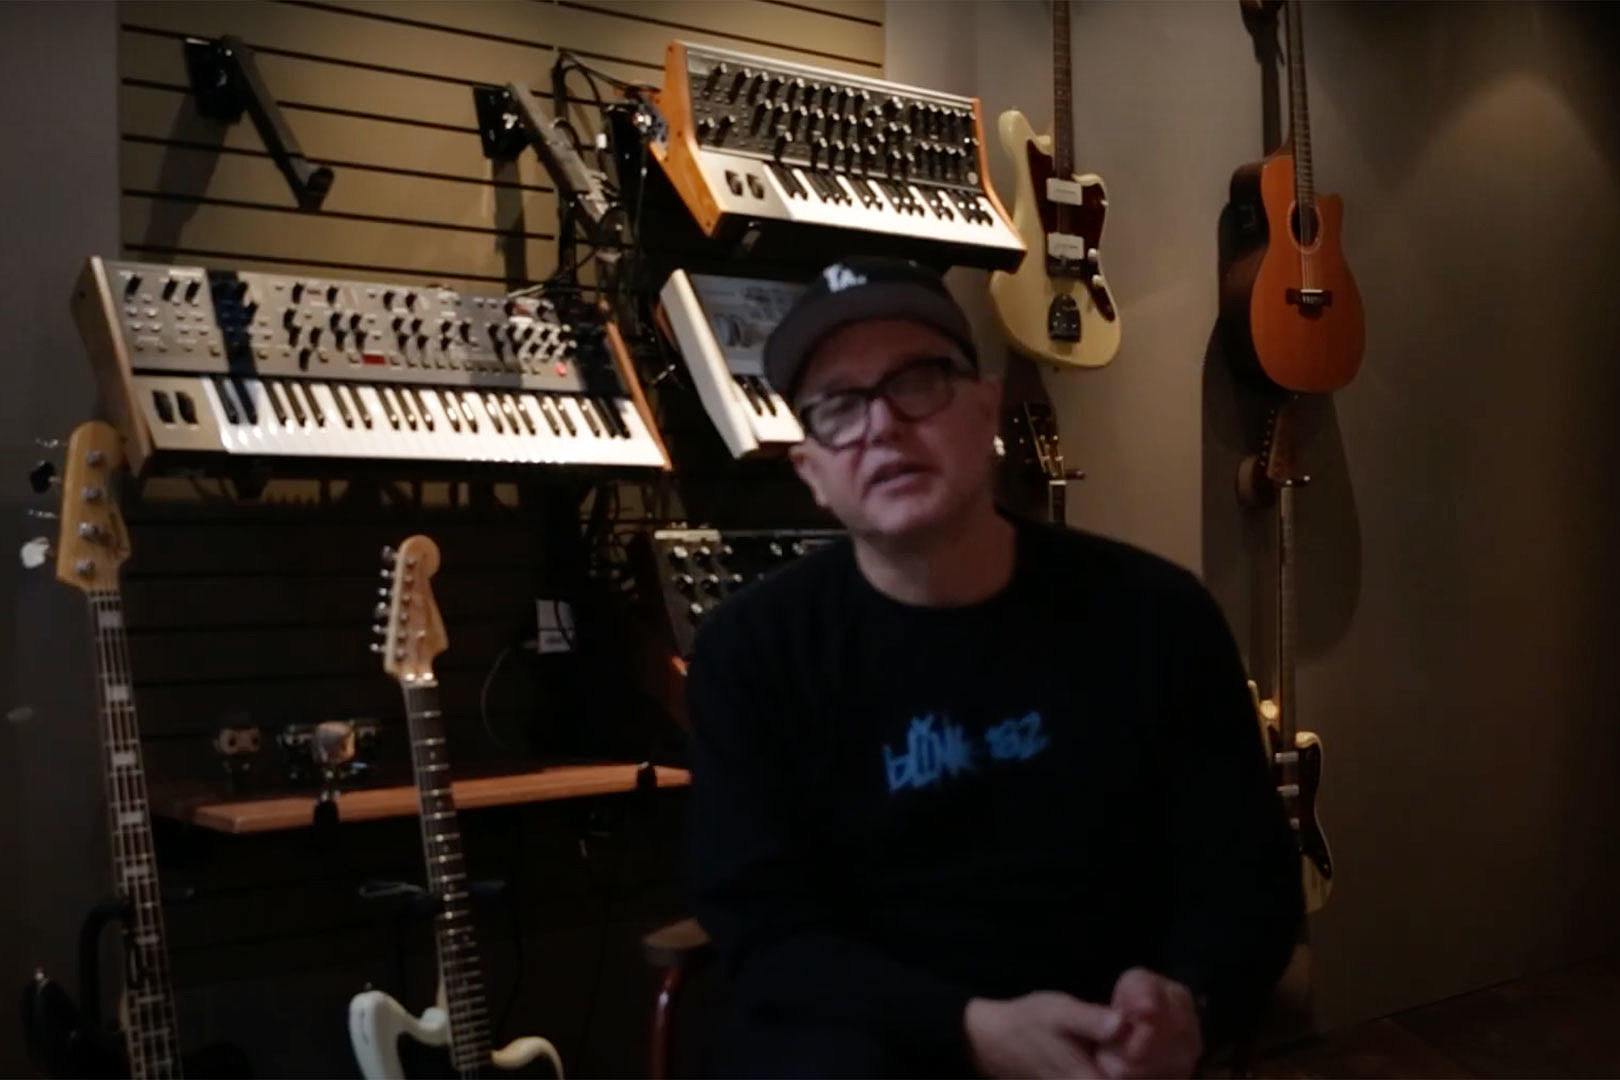 Mark Hoppus Selling Previously Played Gear Online